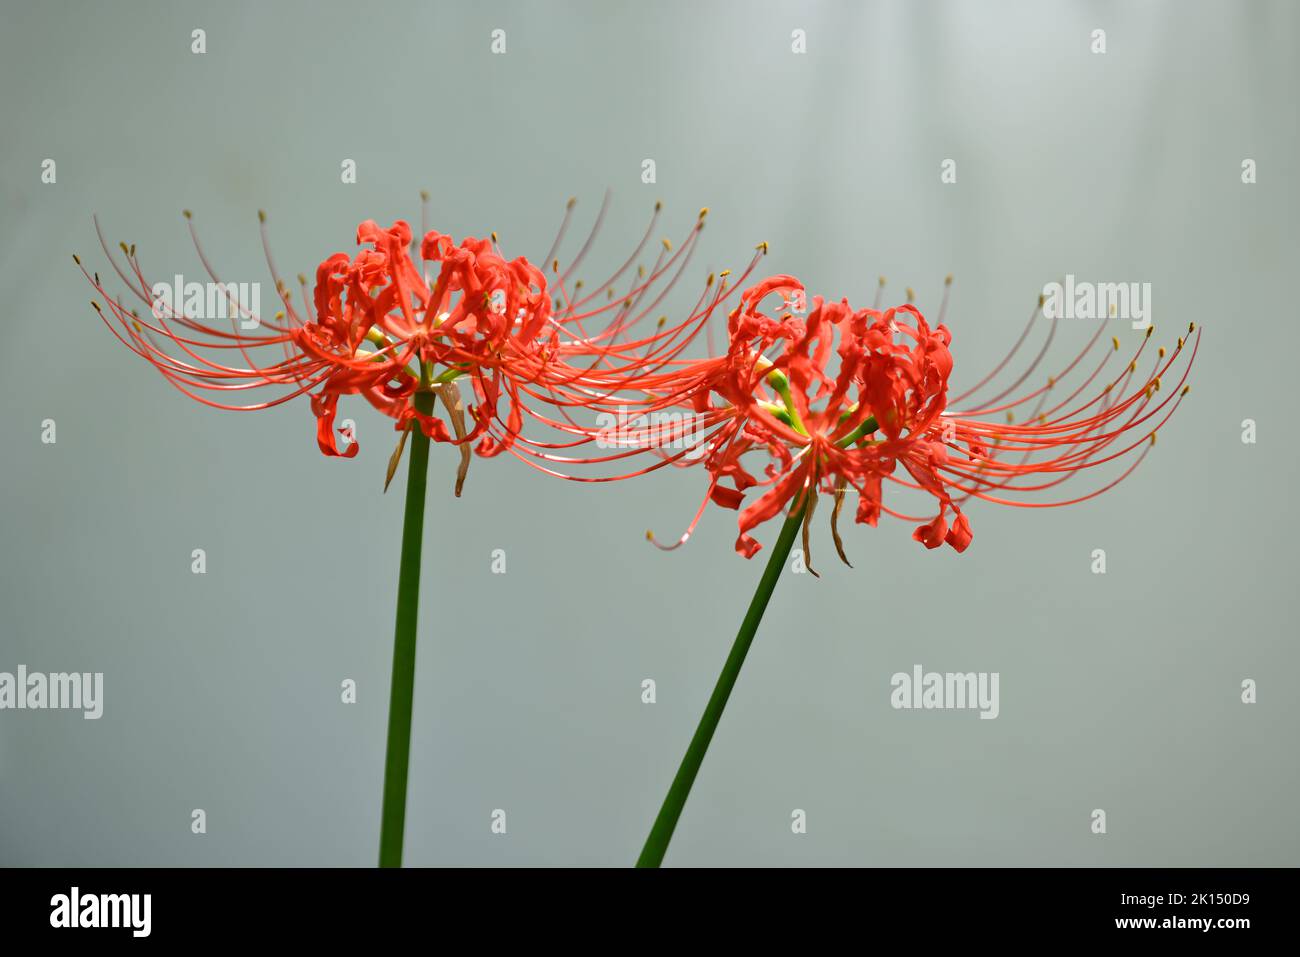 Lycoris radiata, red spider, red magic, resurrection or hurricane lily, corpse or equinox flower plant in the amaryllis family from China. Stock Photo